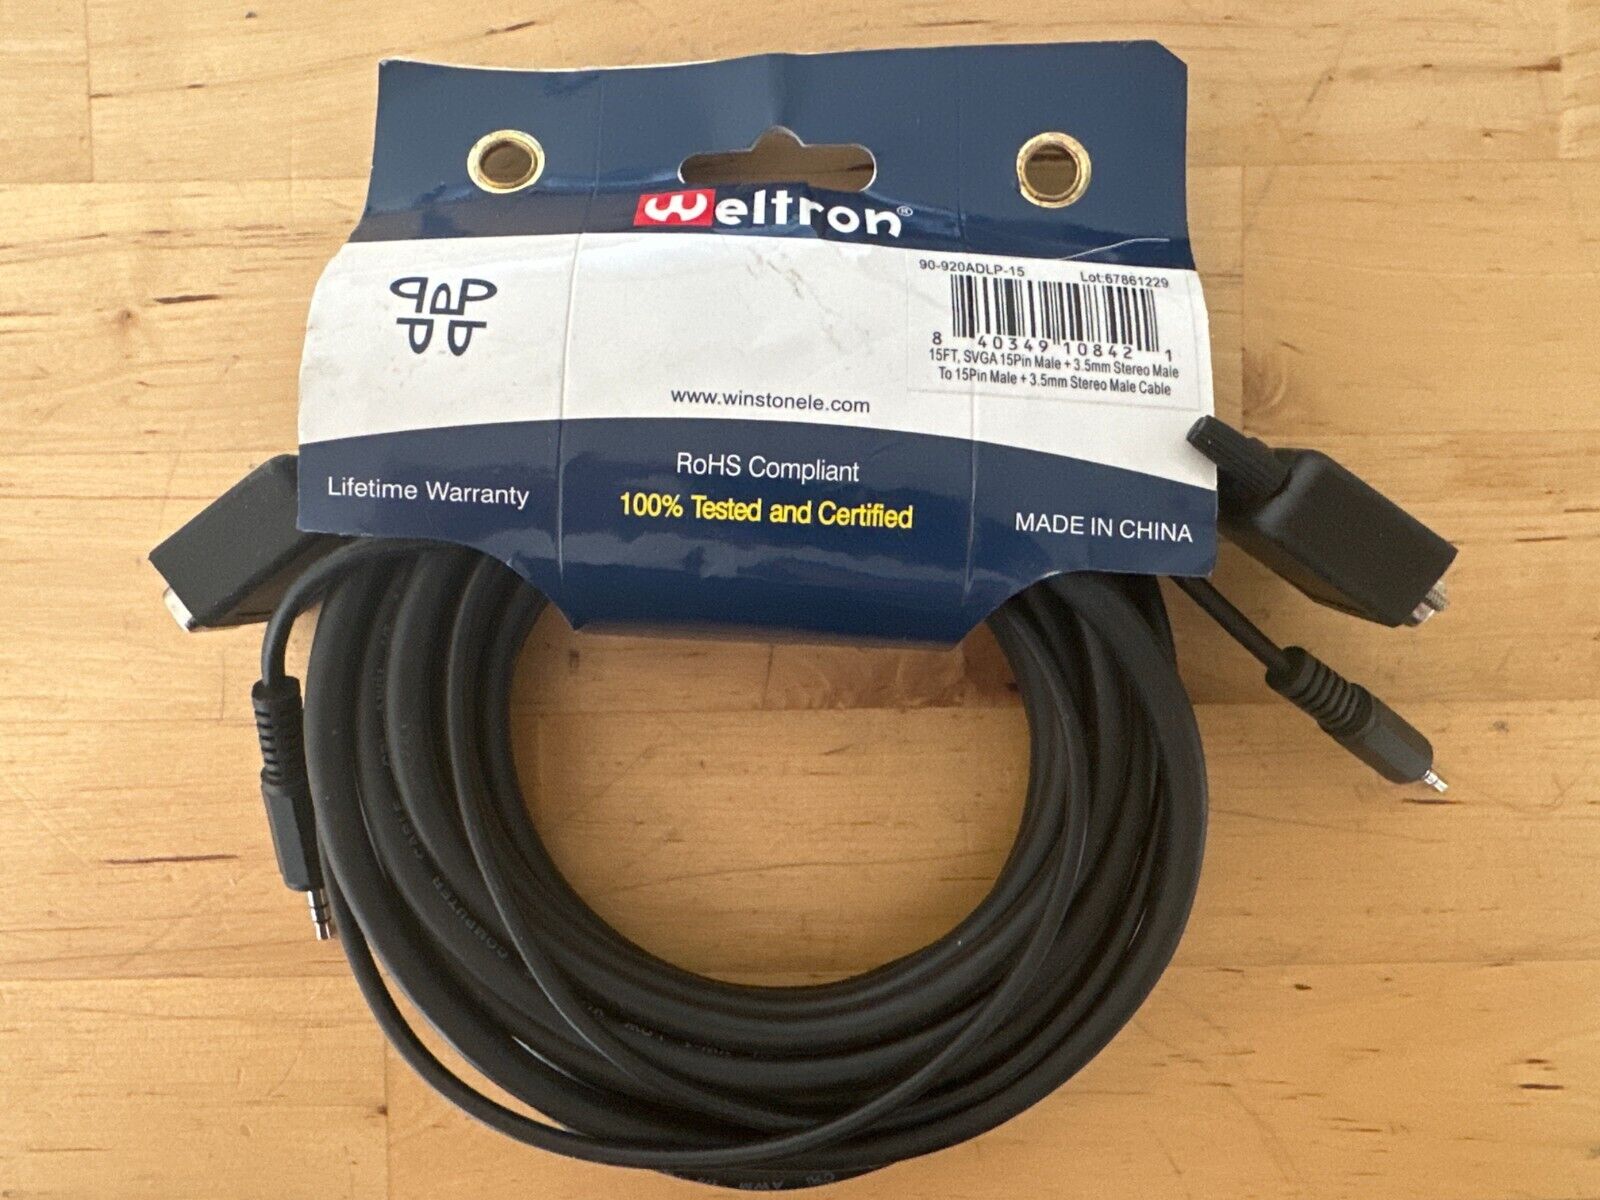 Weltron 90-920ADLP-15 SVGA 15Pin Male + 3.5mm Stereo Cable Male to Male 15ft New